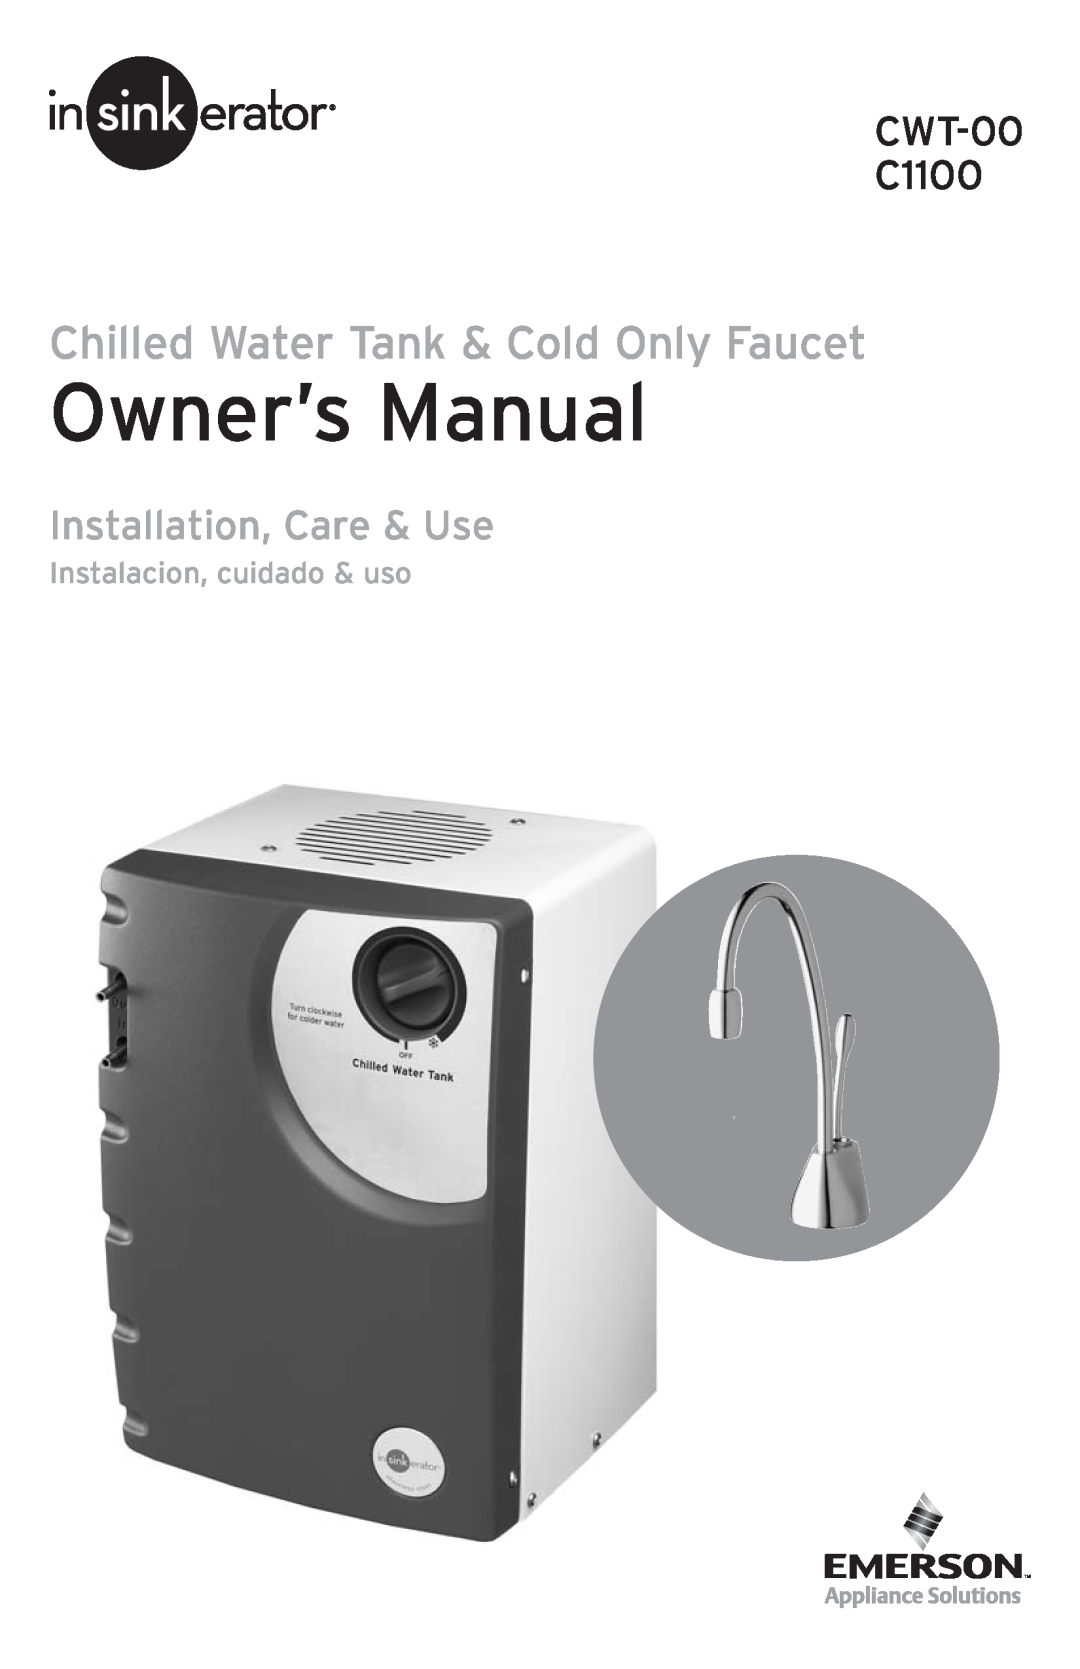 InSinkErator F-C1100 owner manual Instalacion, cuidado & uso, Chilled Water Tank & Cold Only Faucet, CWT-00 C1100 